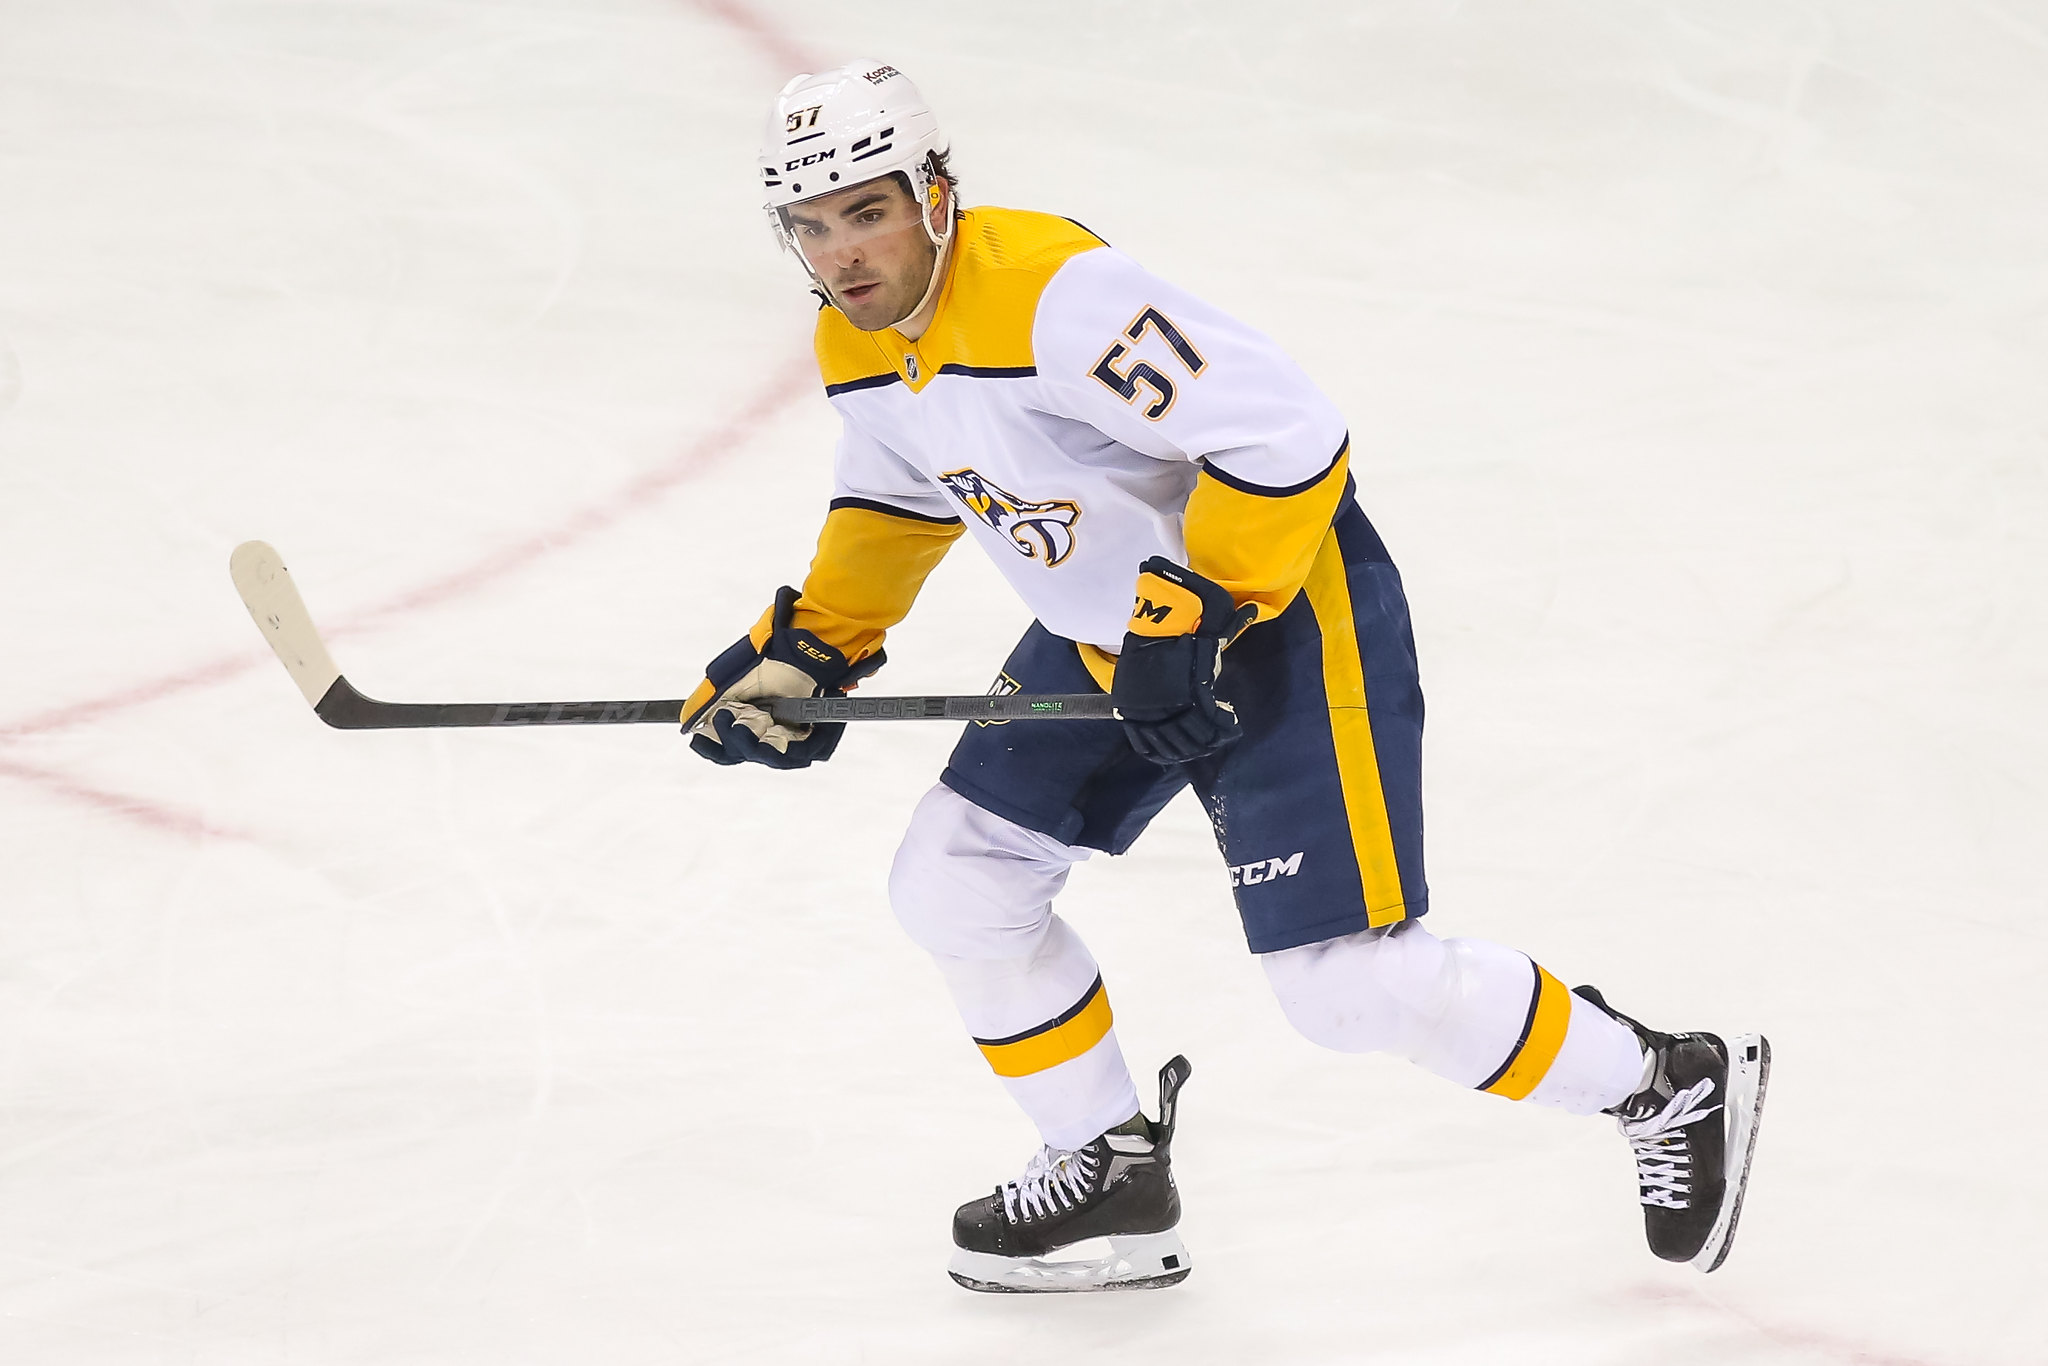 Lightning clear cap space by trading McDonagh to Predators, News